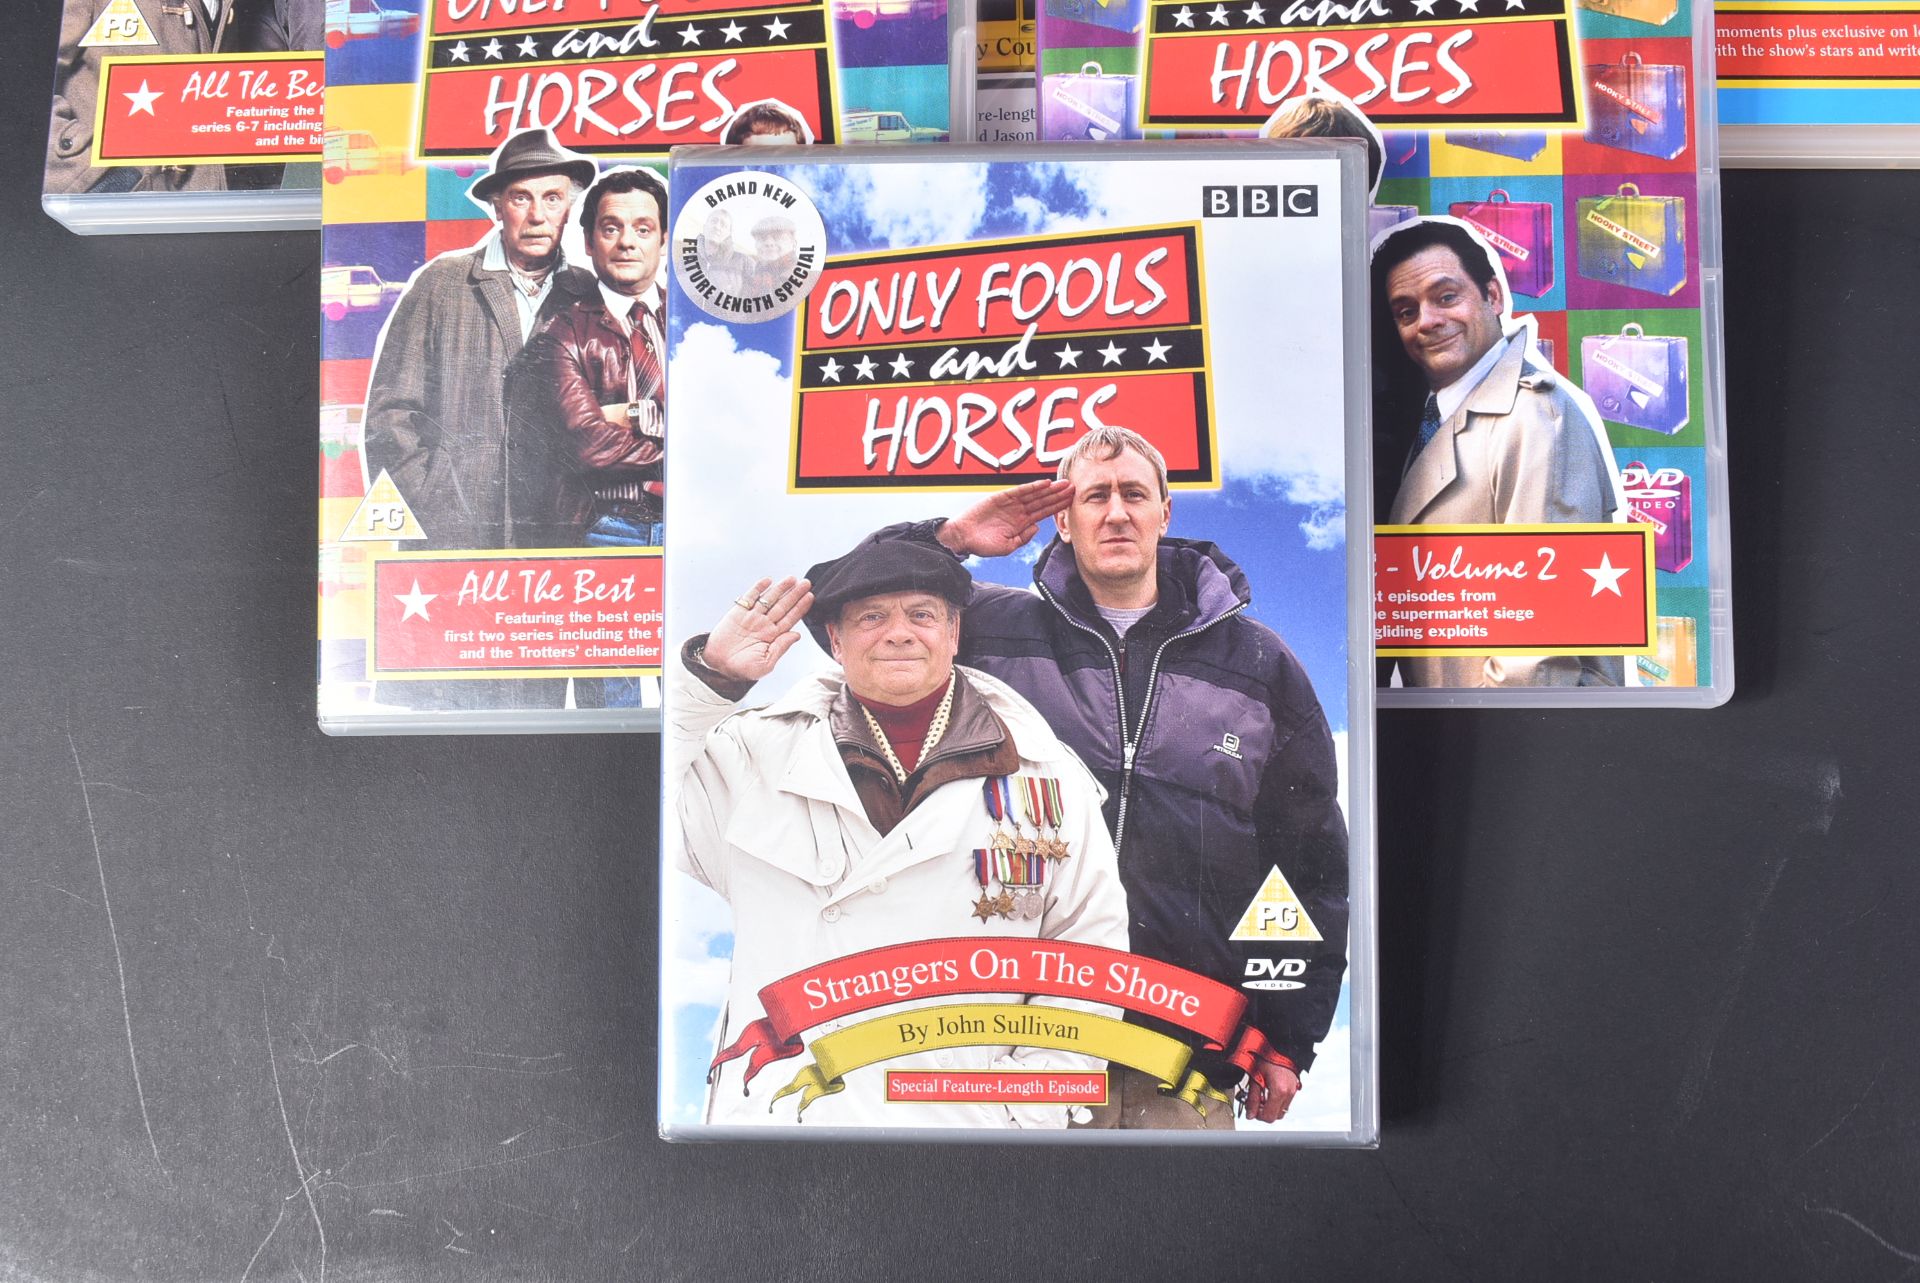 ONLY FOOLS & HORSES - COLLECTION OF DVD BOXED SETS - Image 6 of 6